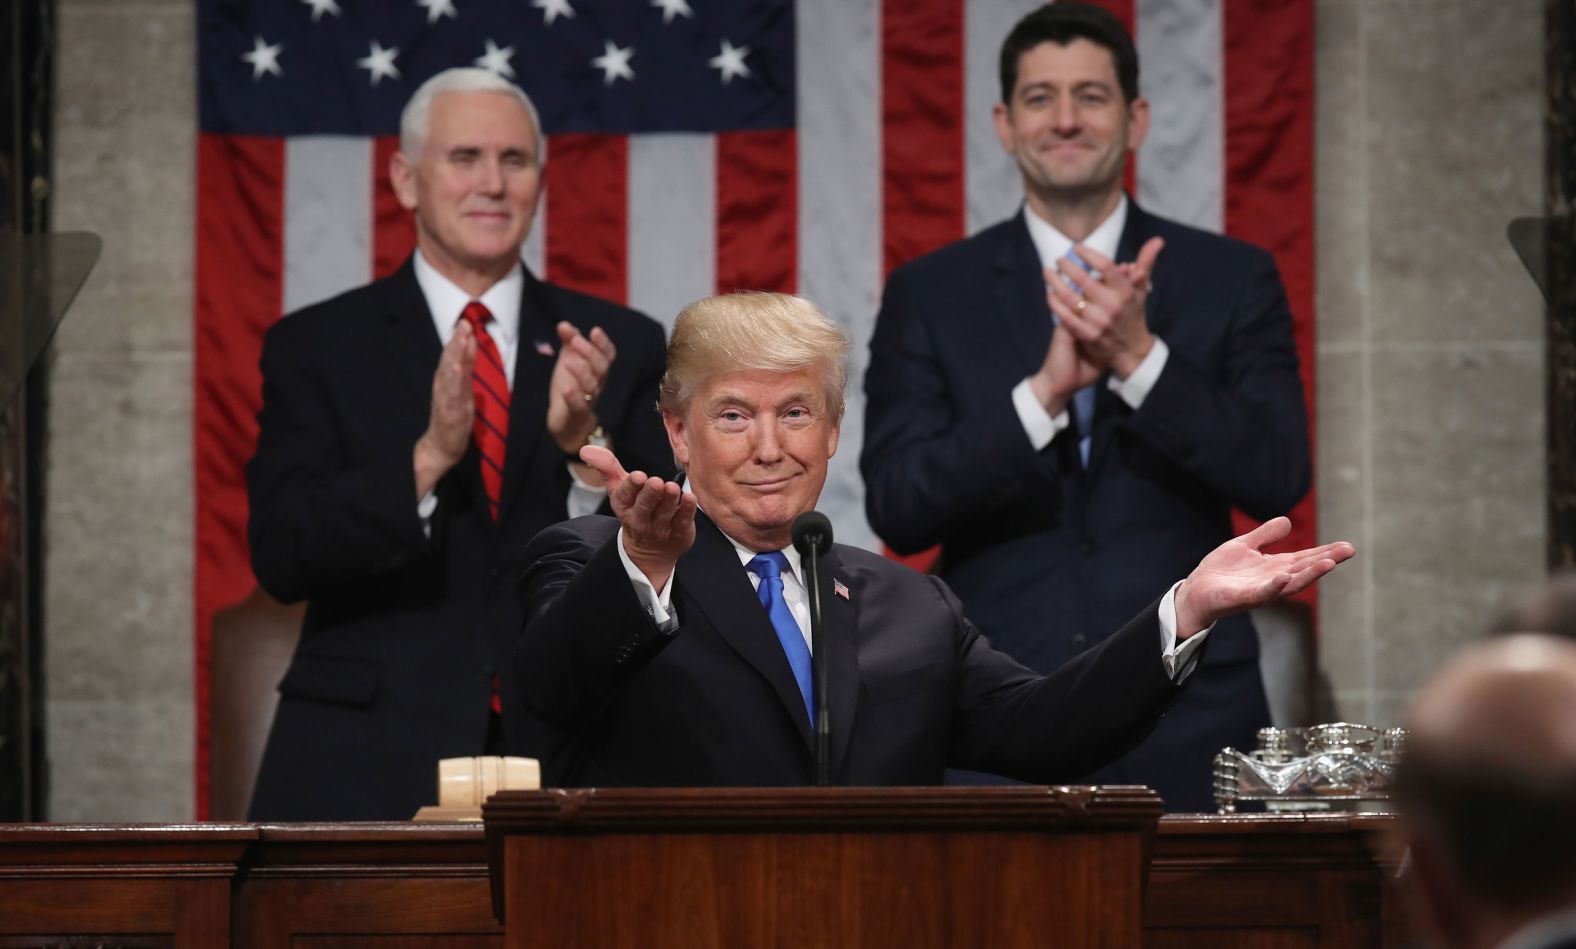 Trump gestures during <a href="index.php?page=&url=https%3A%2F%2Fwww.cnn.com%2Finteractive%2F2018%2F01%2Fpolitics%2Fstate-of-the-union-cnnphotos%2F" target="_blank">his State of the Union address</a> in January 2018. Trump declared that the "state of our union is strong because our people are strong. Together, we are building a safe, strong and proud America."